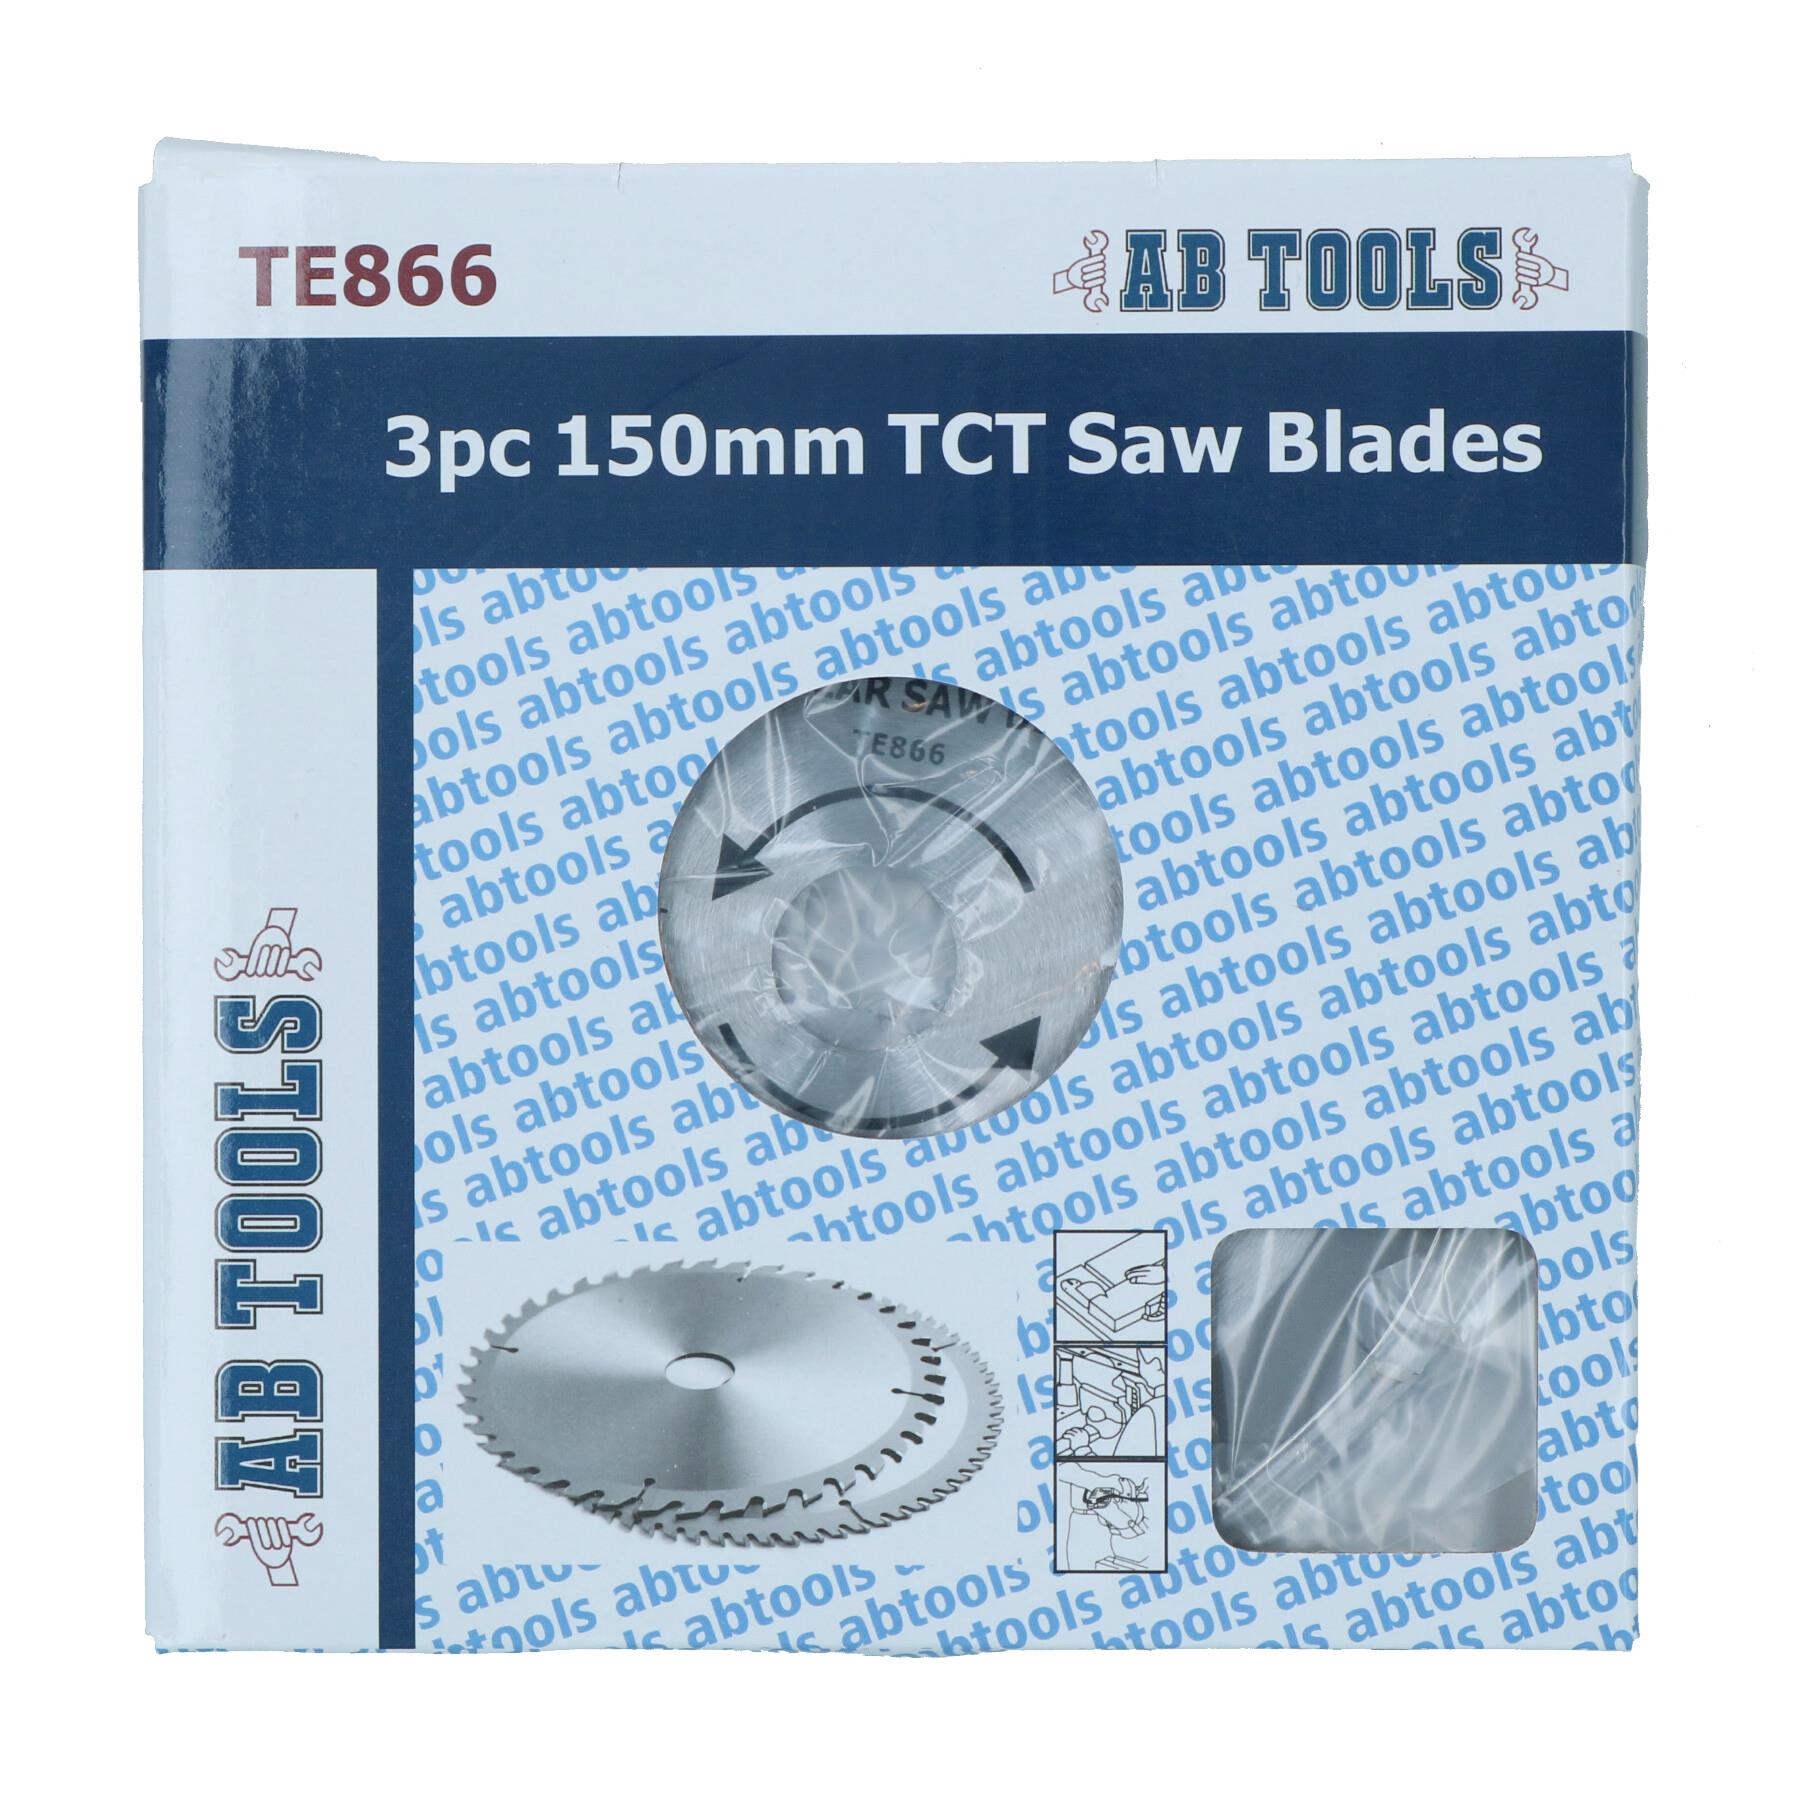 3pc 150mm TCT Circular Saw Blades 16/24/30 TPI & Adapter Rings Reducer TE866